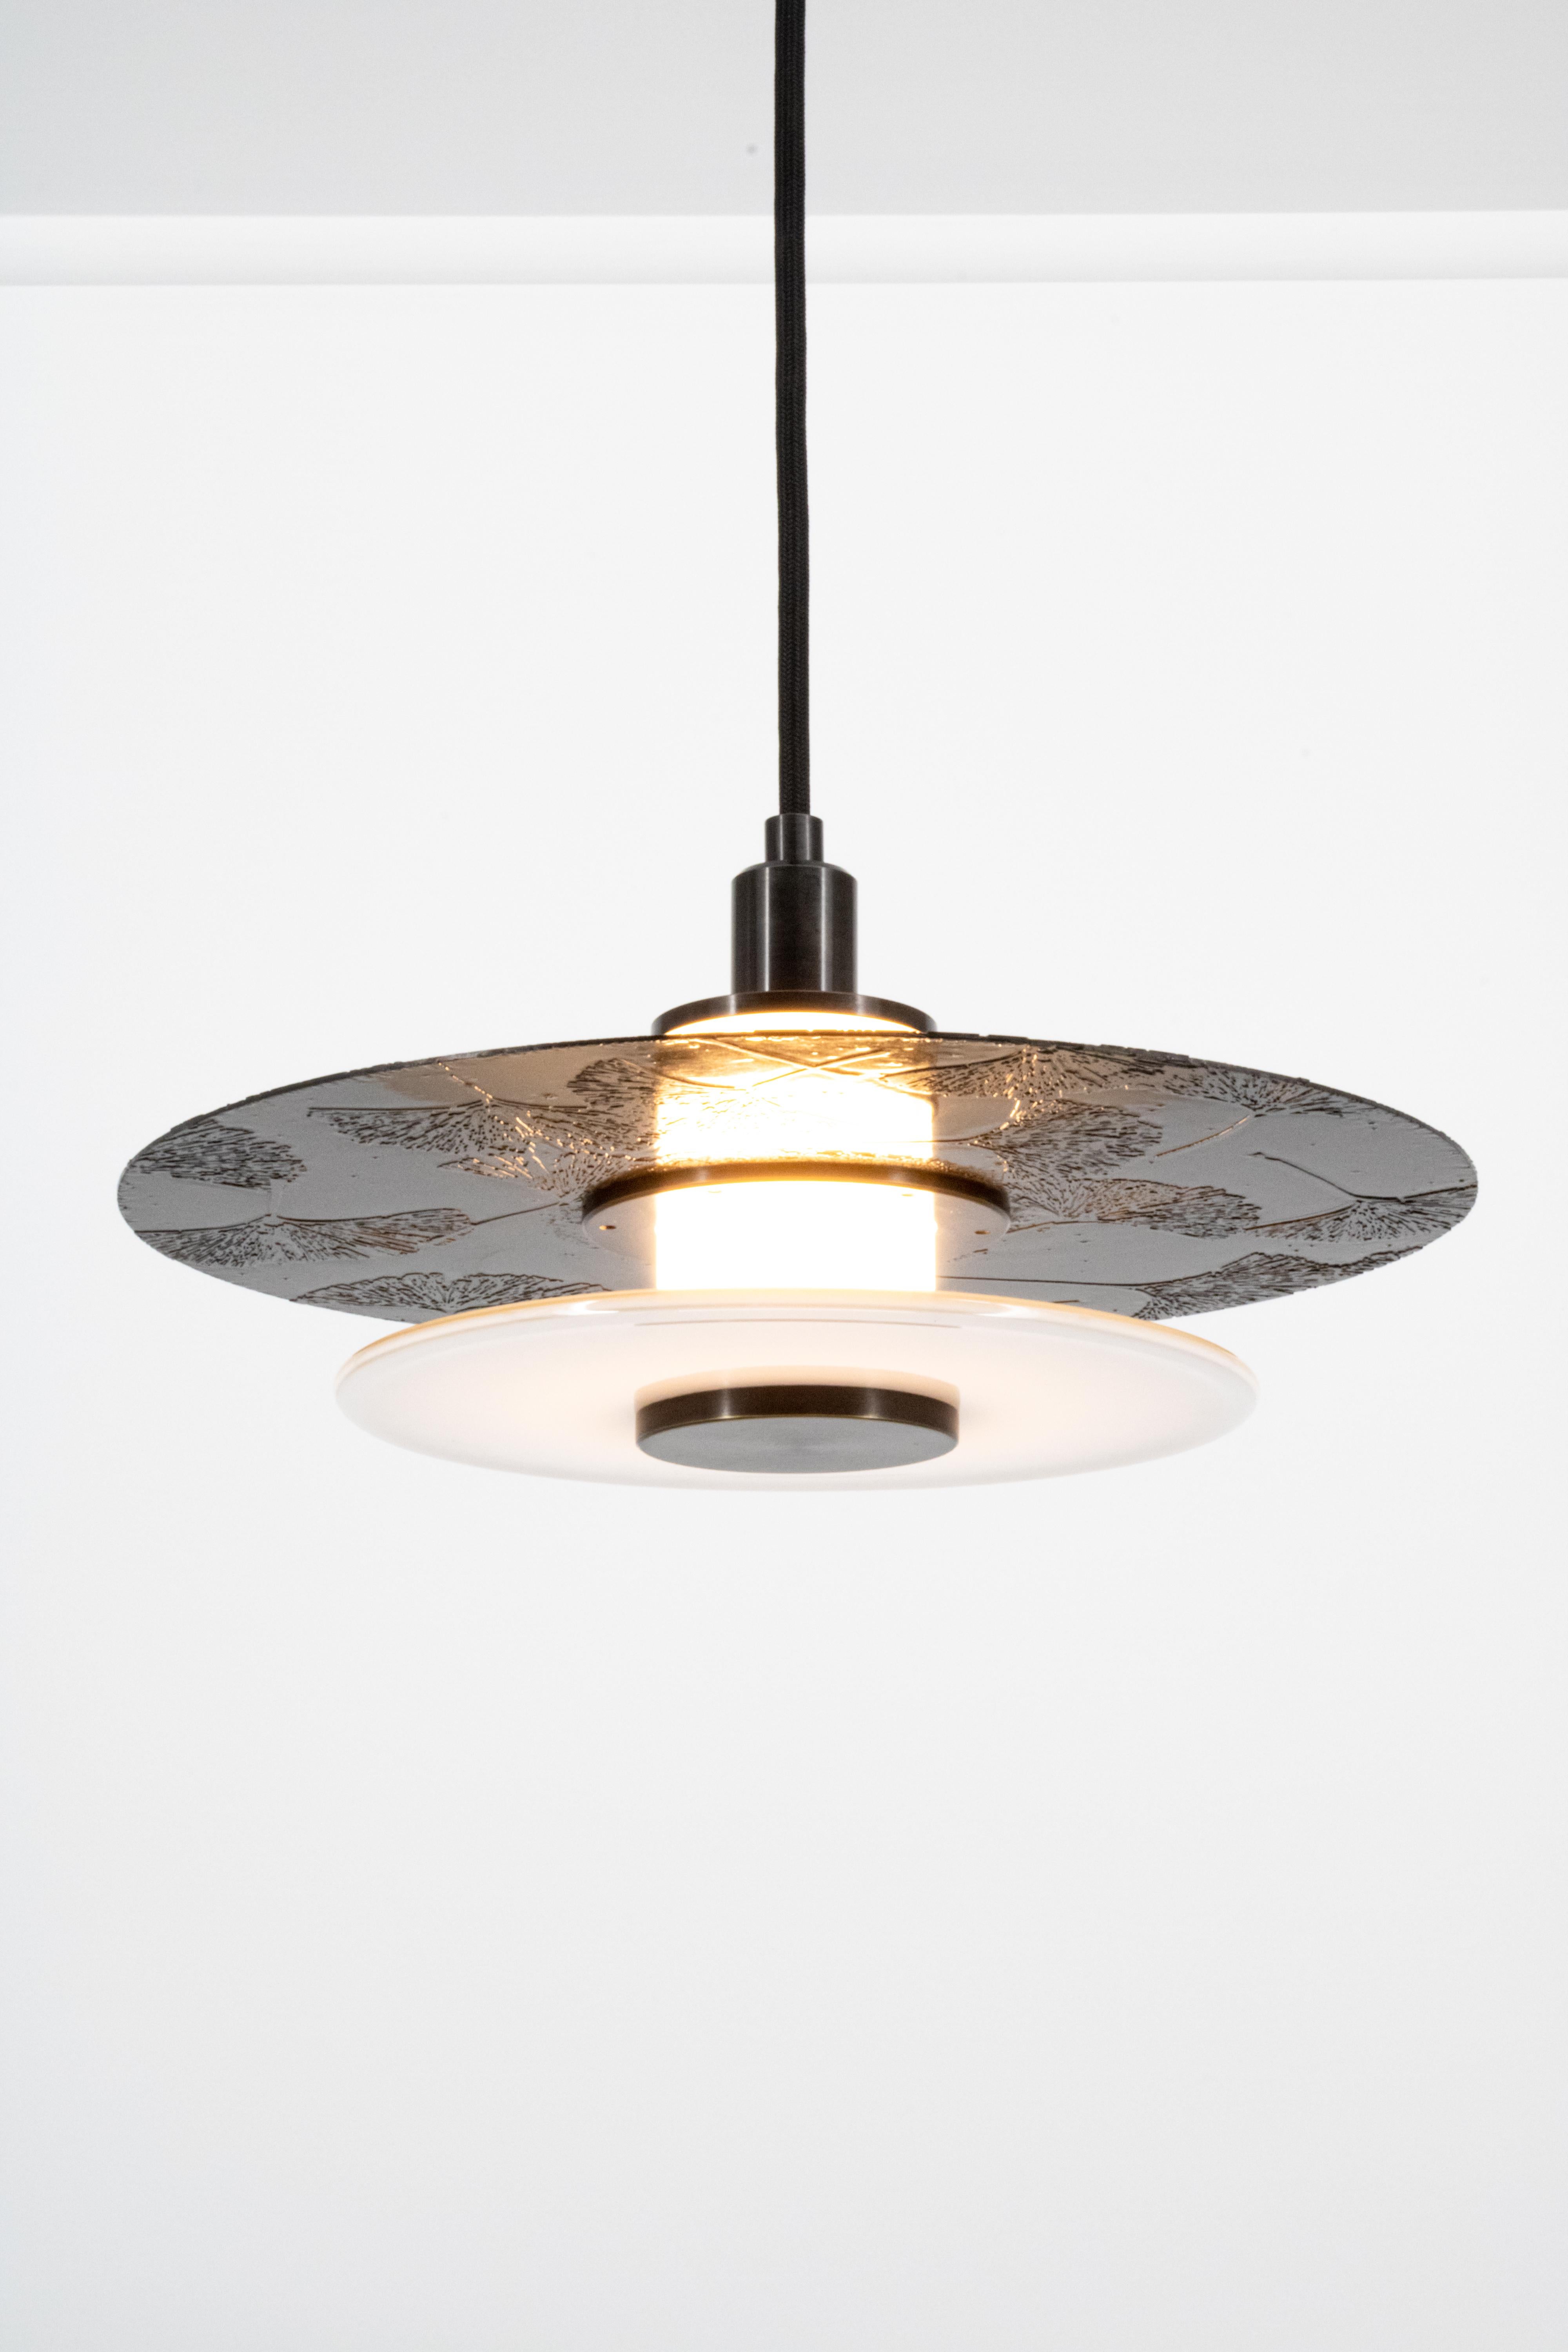 At eleven inches in diameter the Klein Pendant embraces a layered light assembly comprising a hand blown glass rondelle and an etched and polished brass disc. Mounted to a central white light tube, the Klein Pendant offers ample up lighting as well